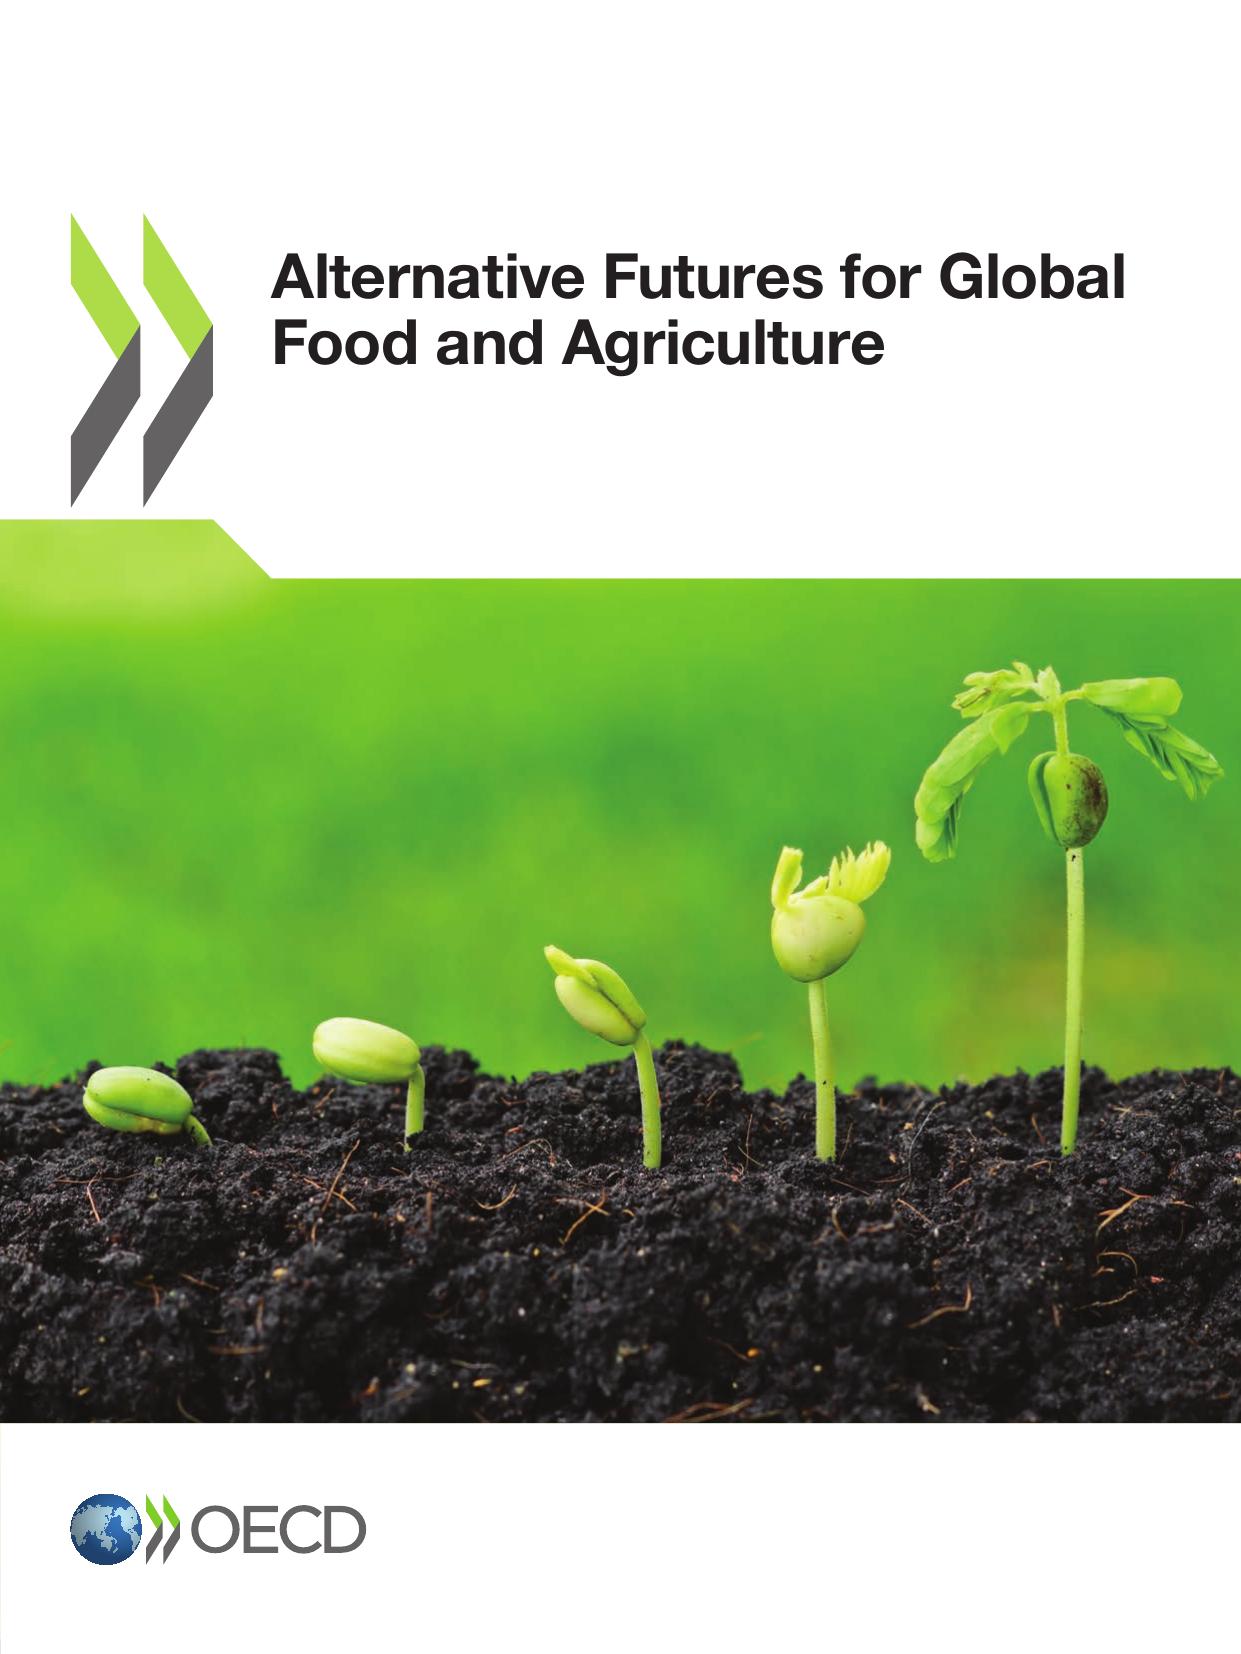 Alternative Futures for Global Food and Agriculture 2016